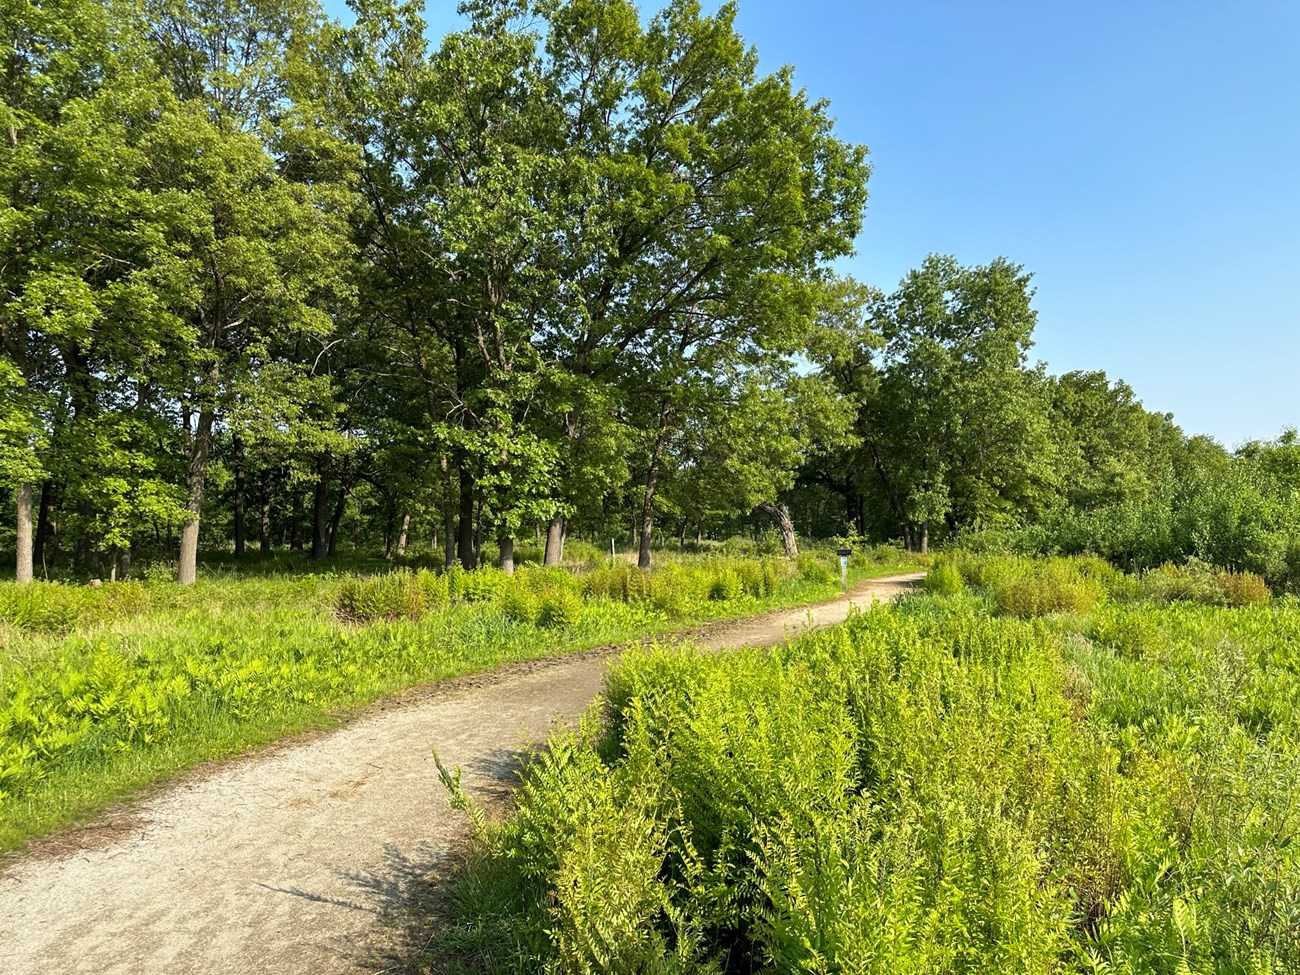 Sunny scene with a gravel trail separating a prairie habitat on the right with a savanna habitat on the left. Bright blue sky.